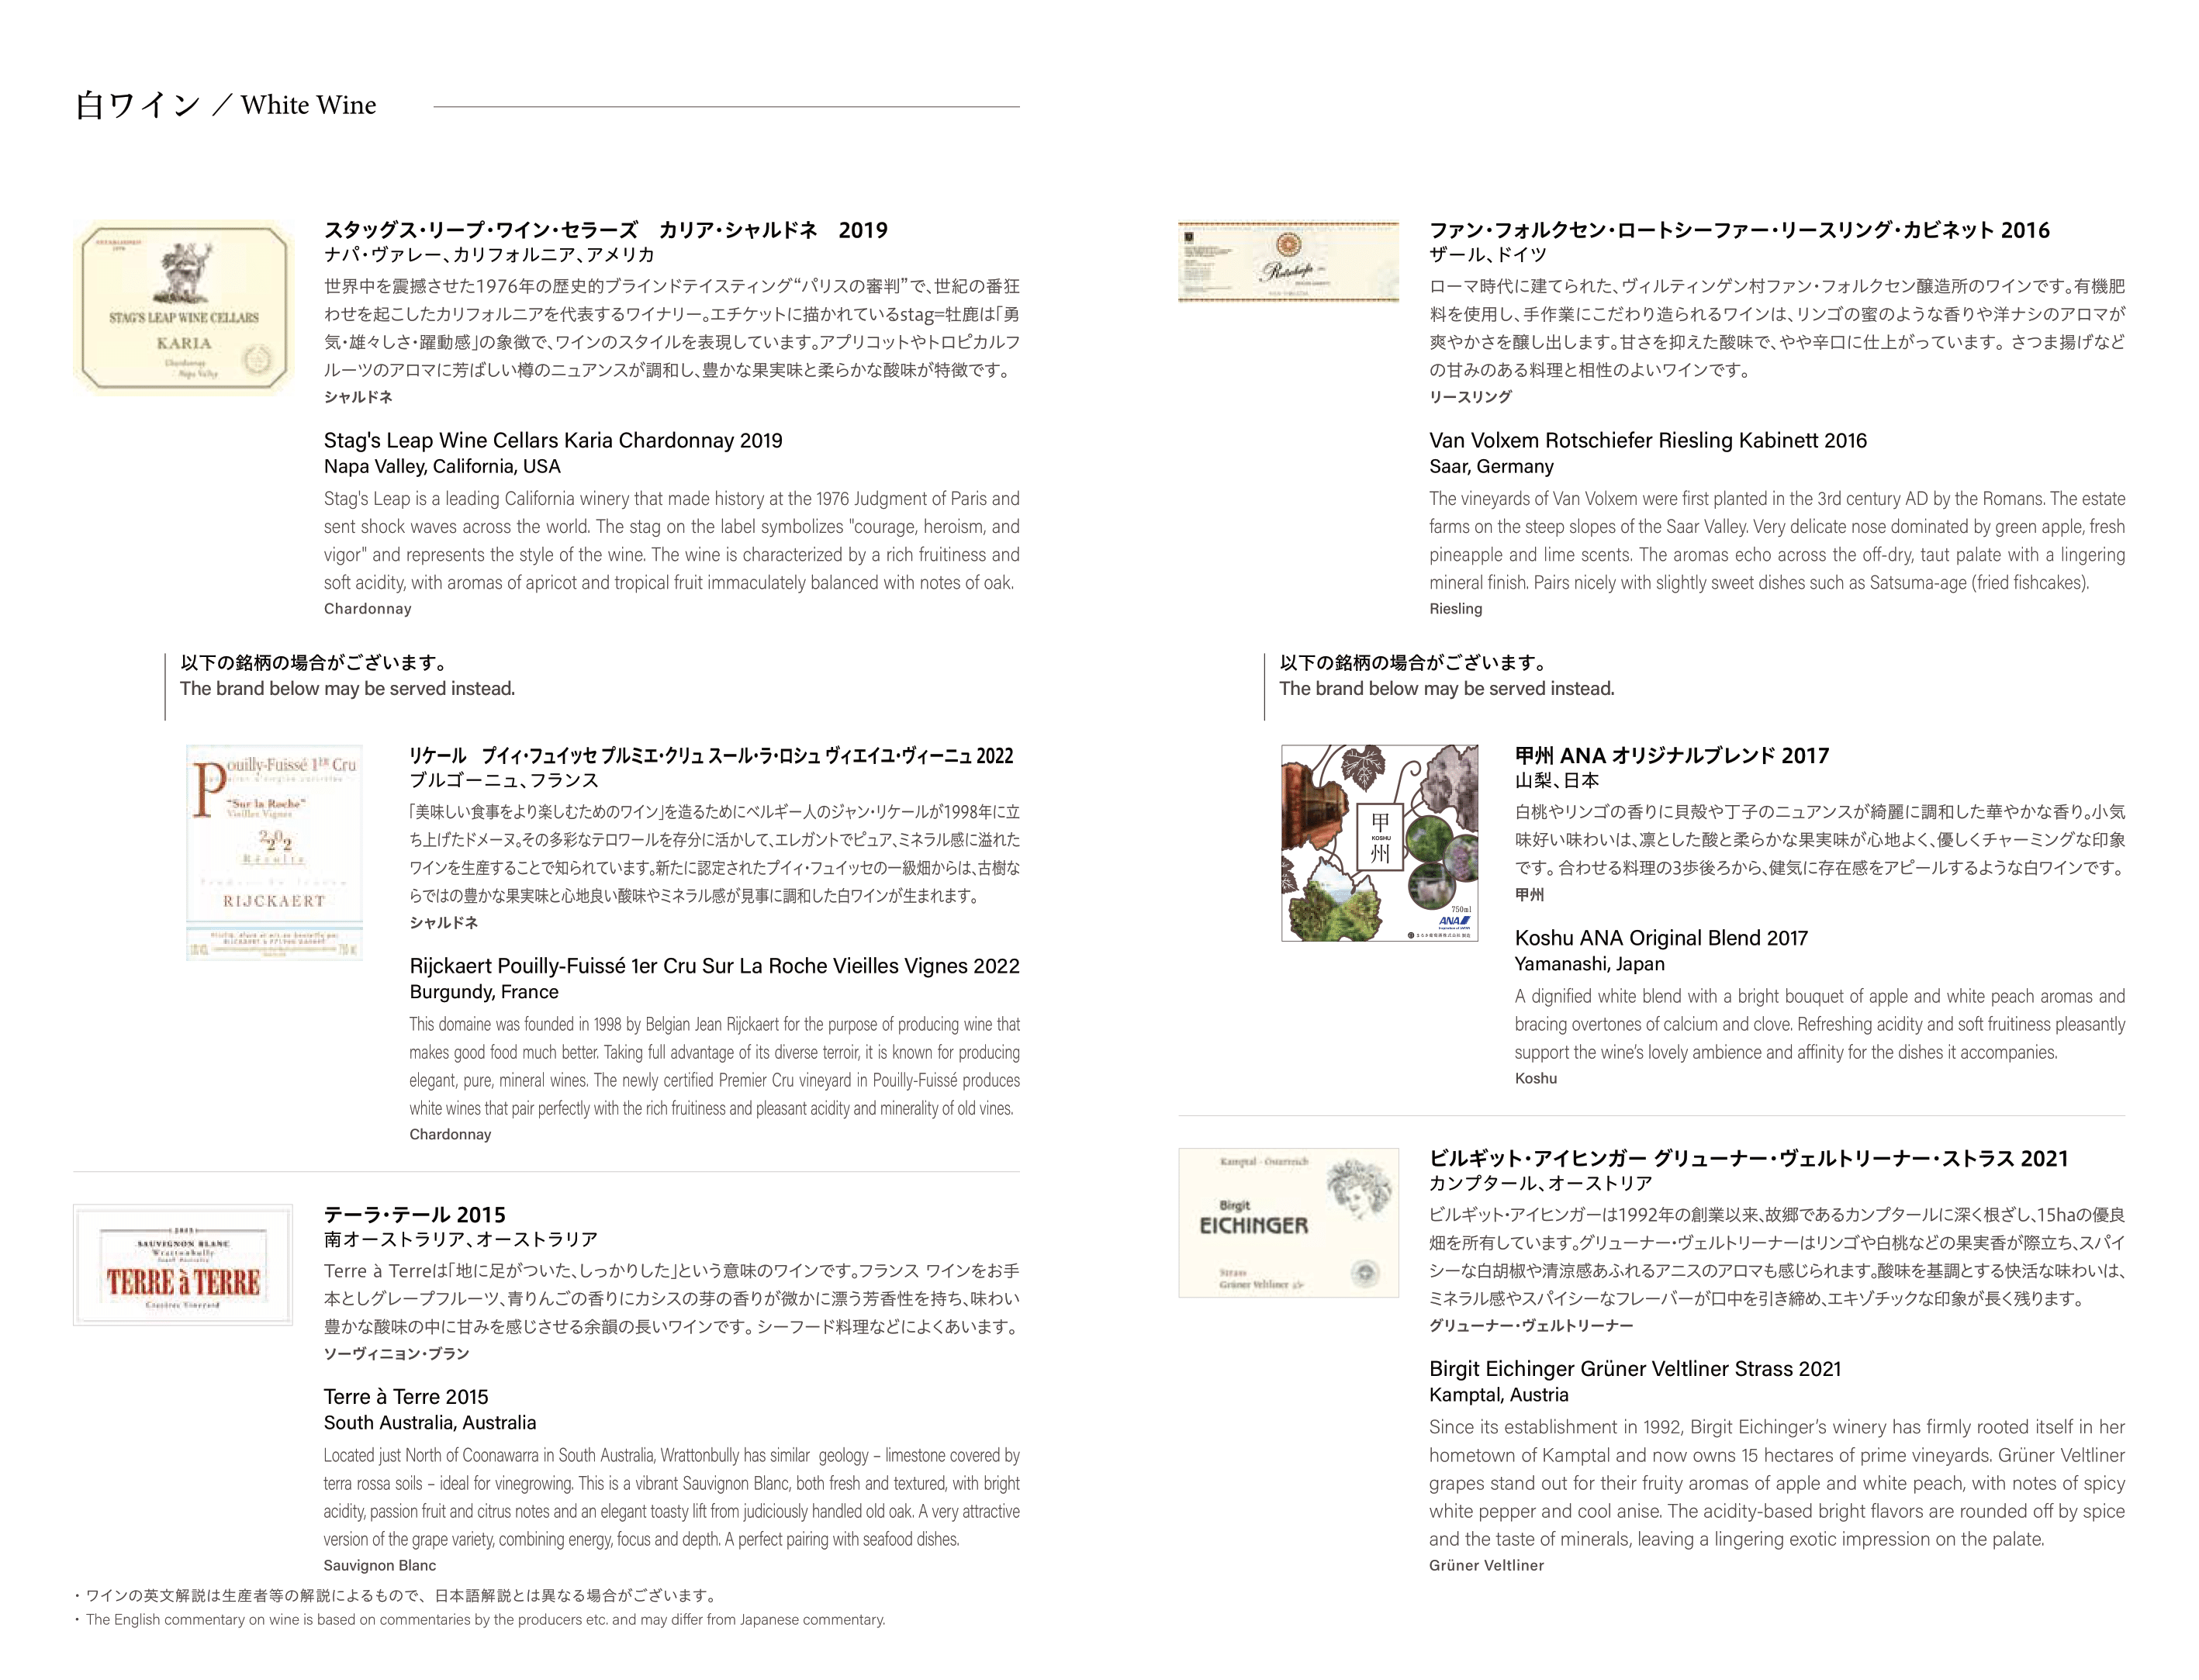 Second page of ANA beverage menu showing white wine.